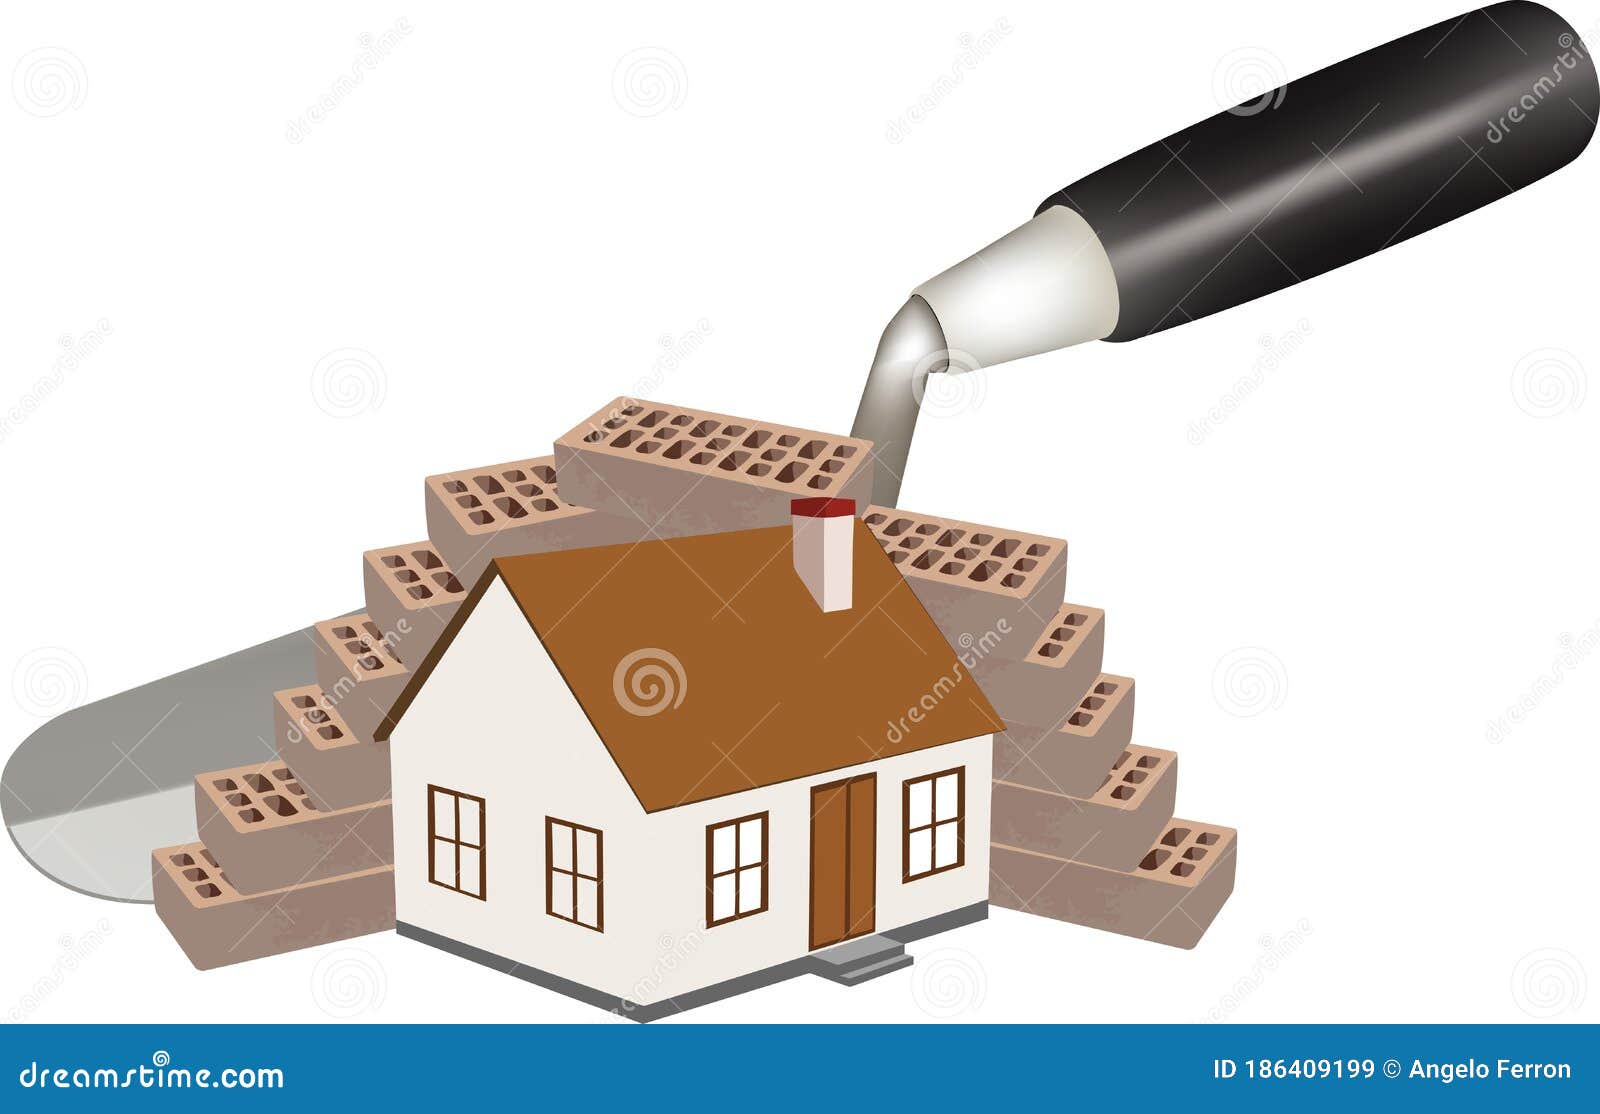 trowel shovel with over a dwelling house